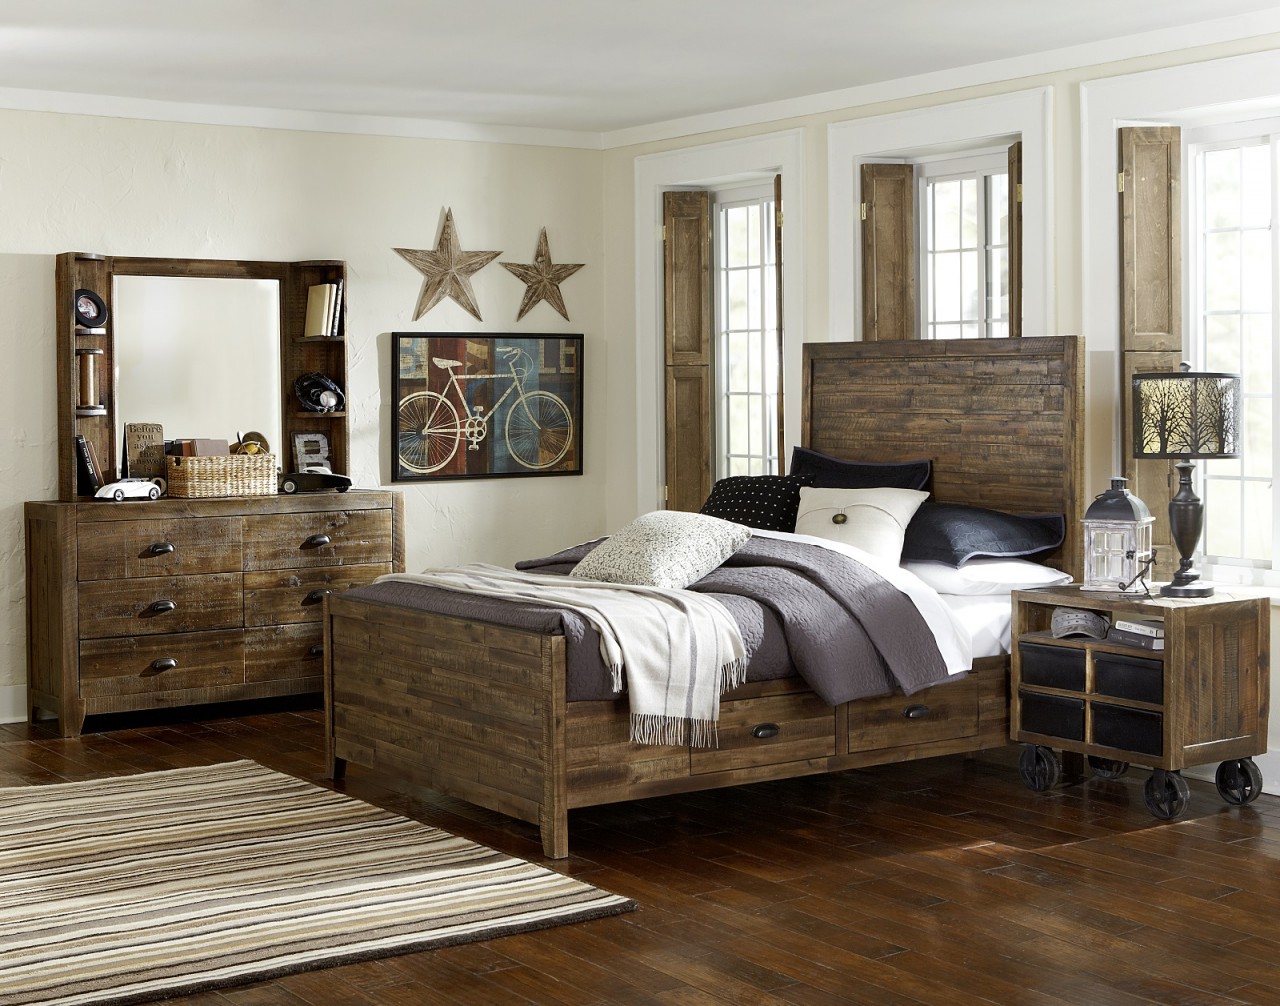 White and Wood Bedroom photo - 9